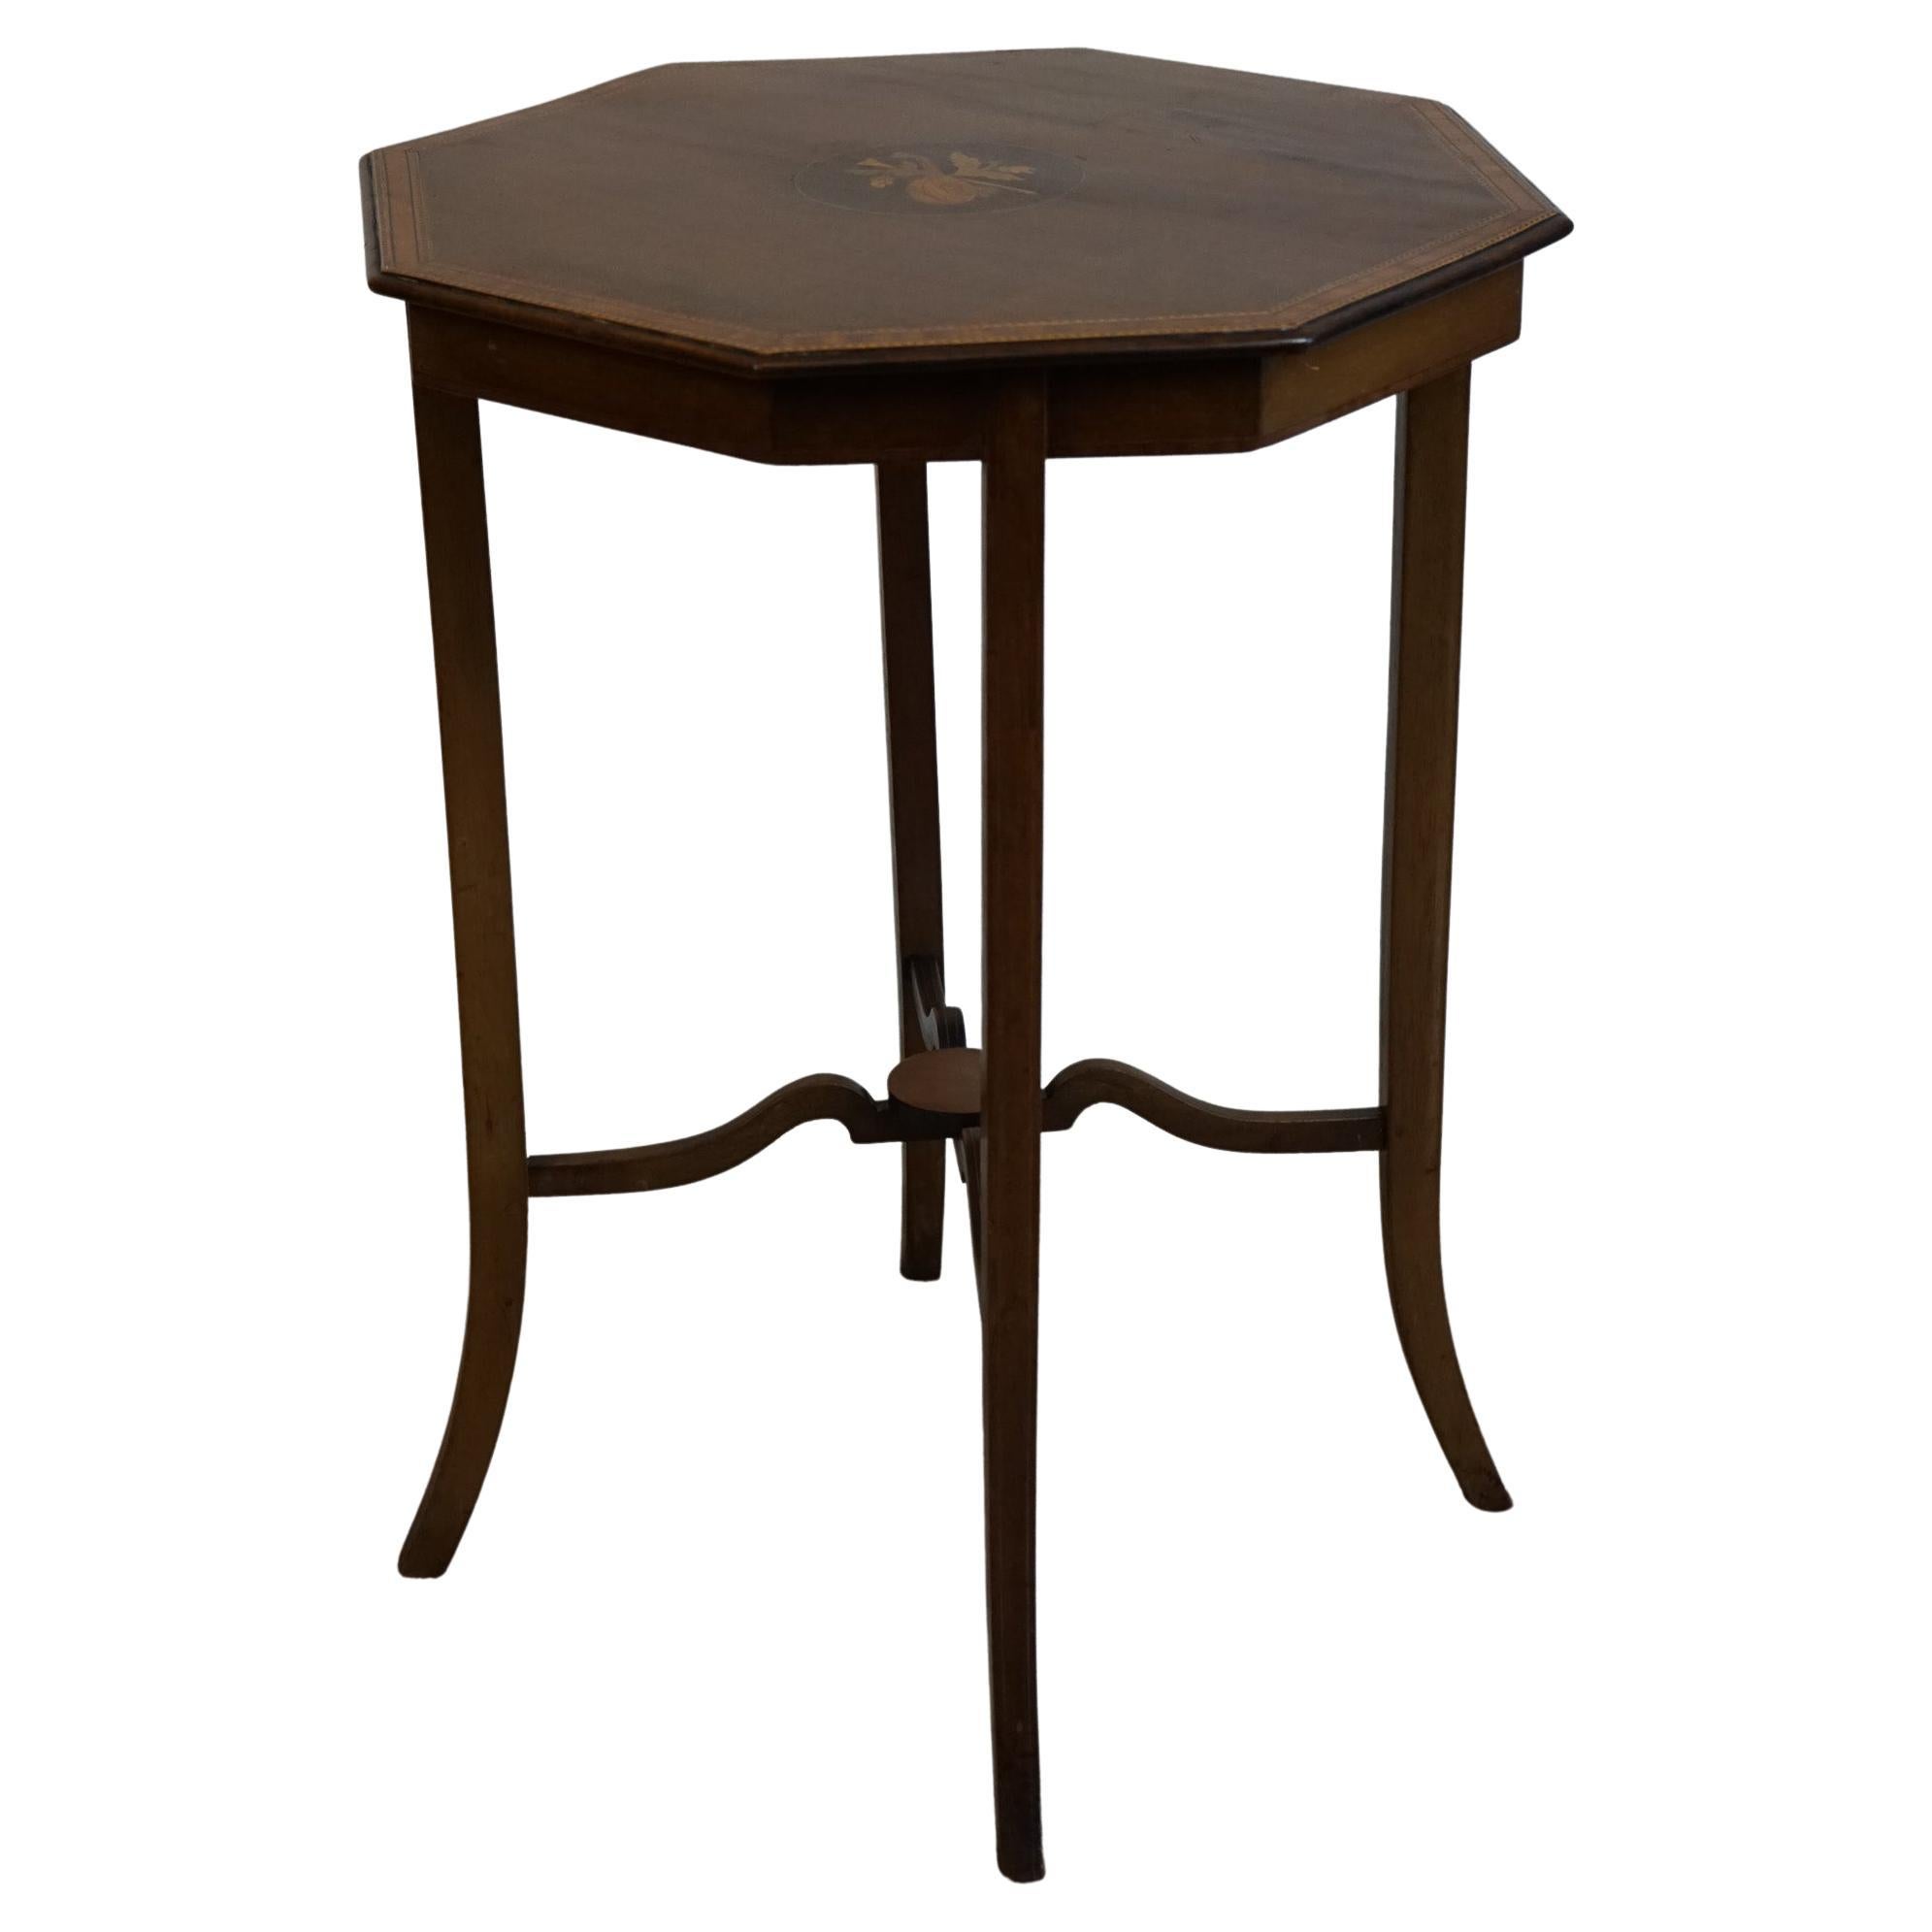 Antique Edwardian Inlaid  Side Table.
A beautiful inlaid side table dating 1900 In sturdy condition for the age . 
Don't hesitate to contact me if you have any questions.
Please have a closer look at the pictures because they form part of the